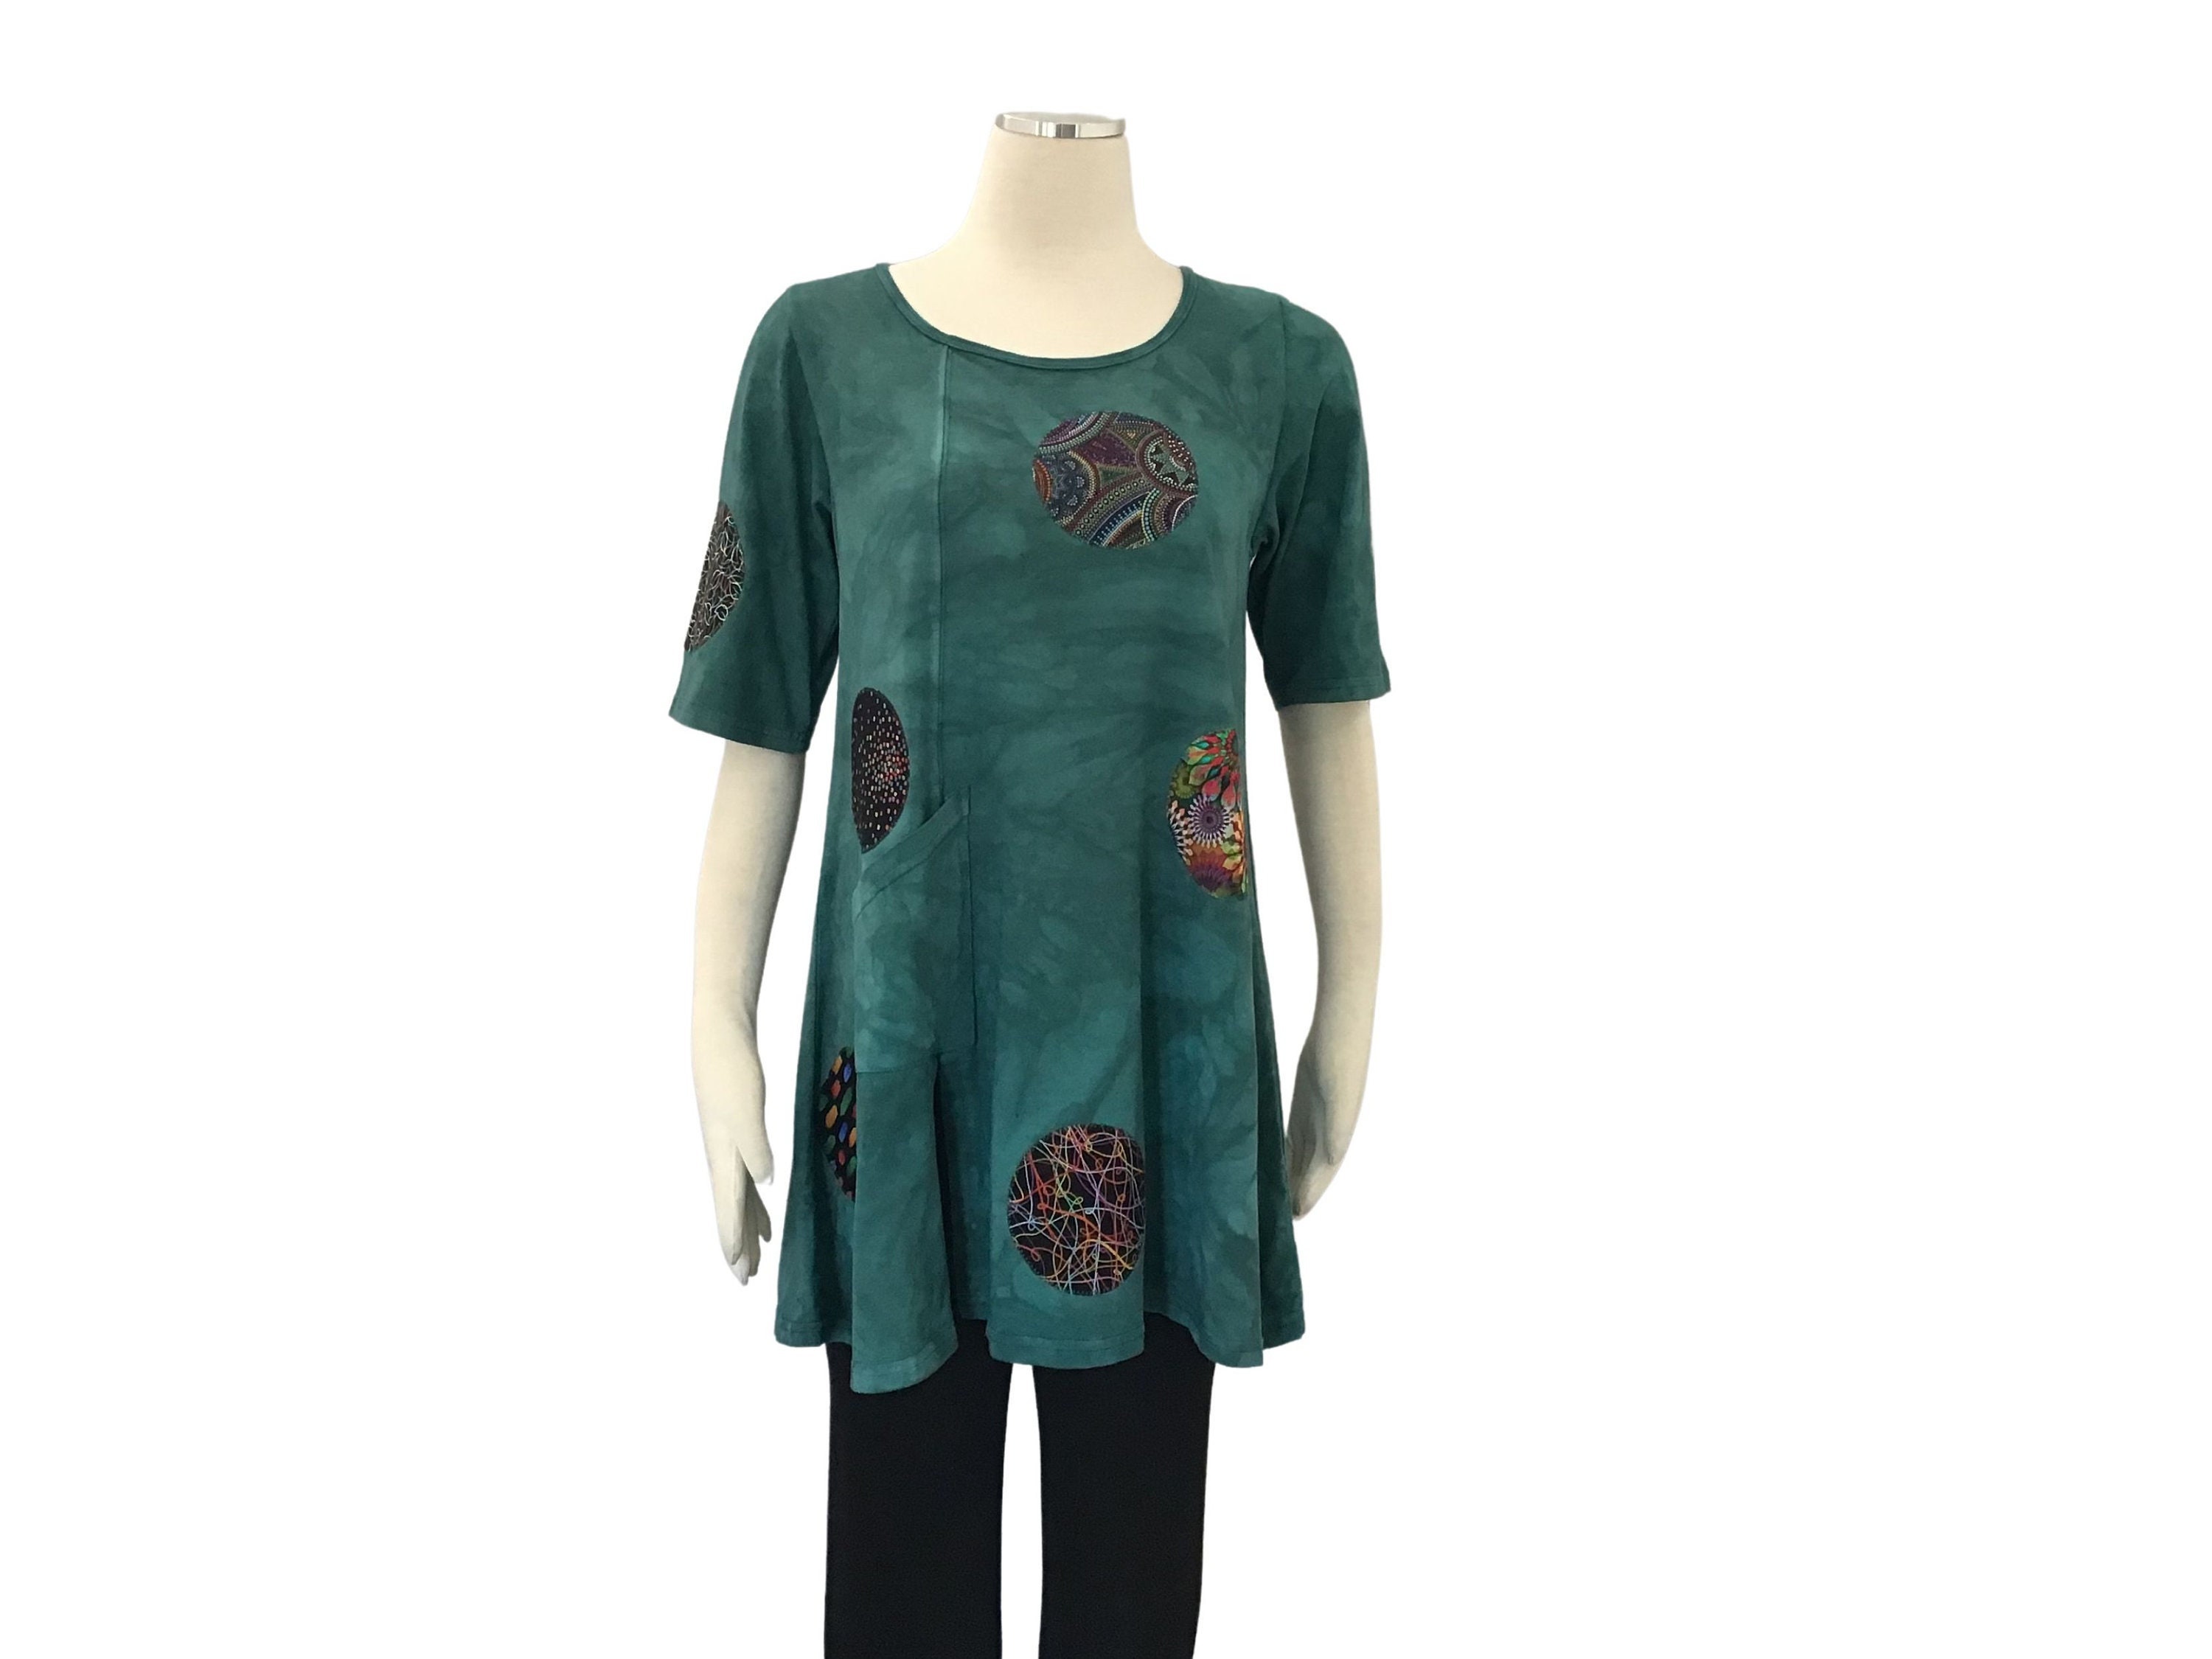 Green Tunic Top With Slant Pocket & Elbow Length Sleeves - Etsy